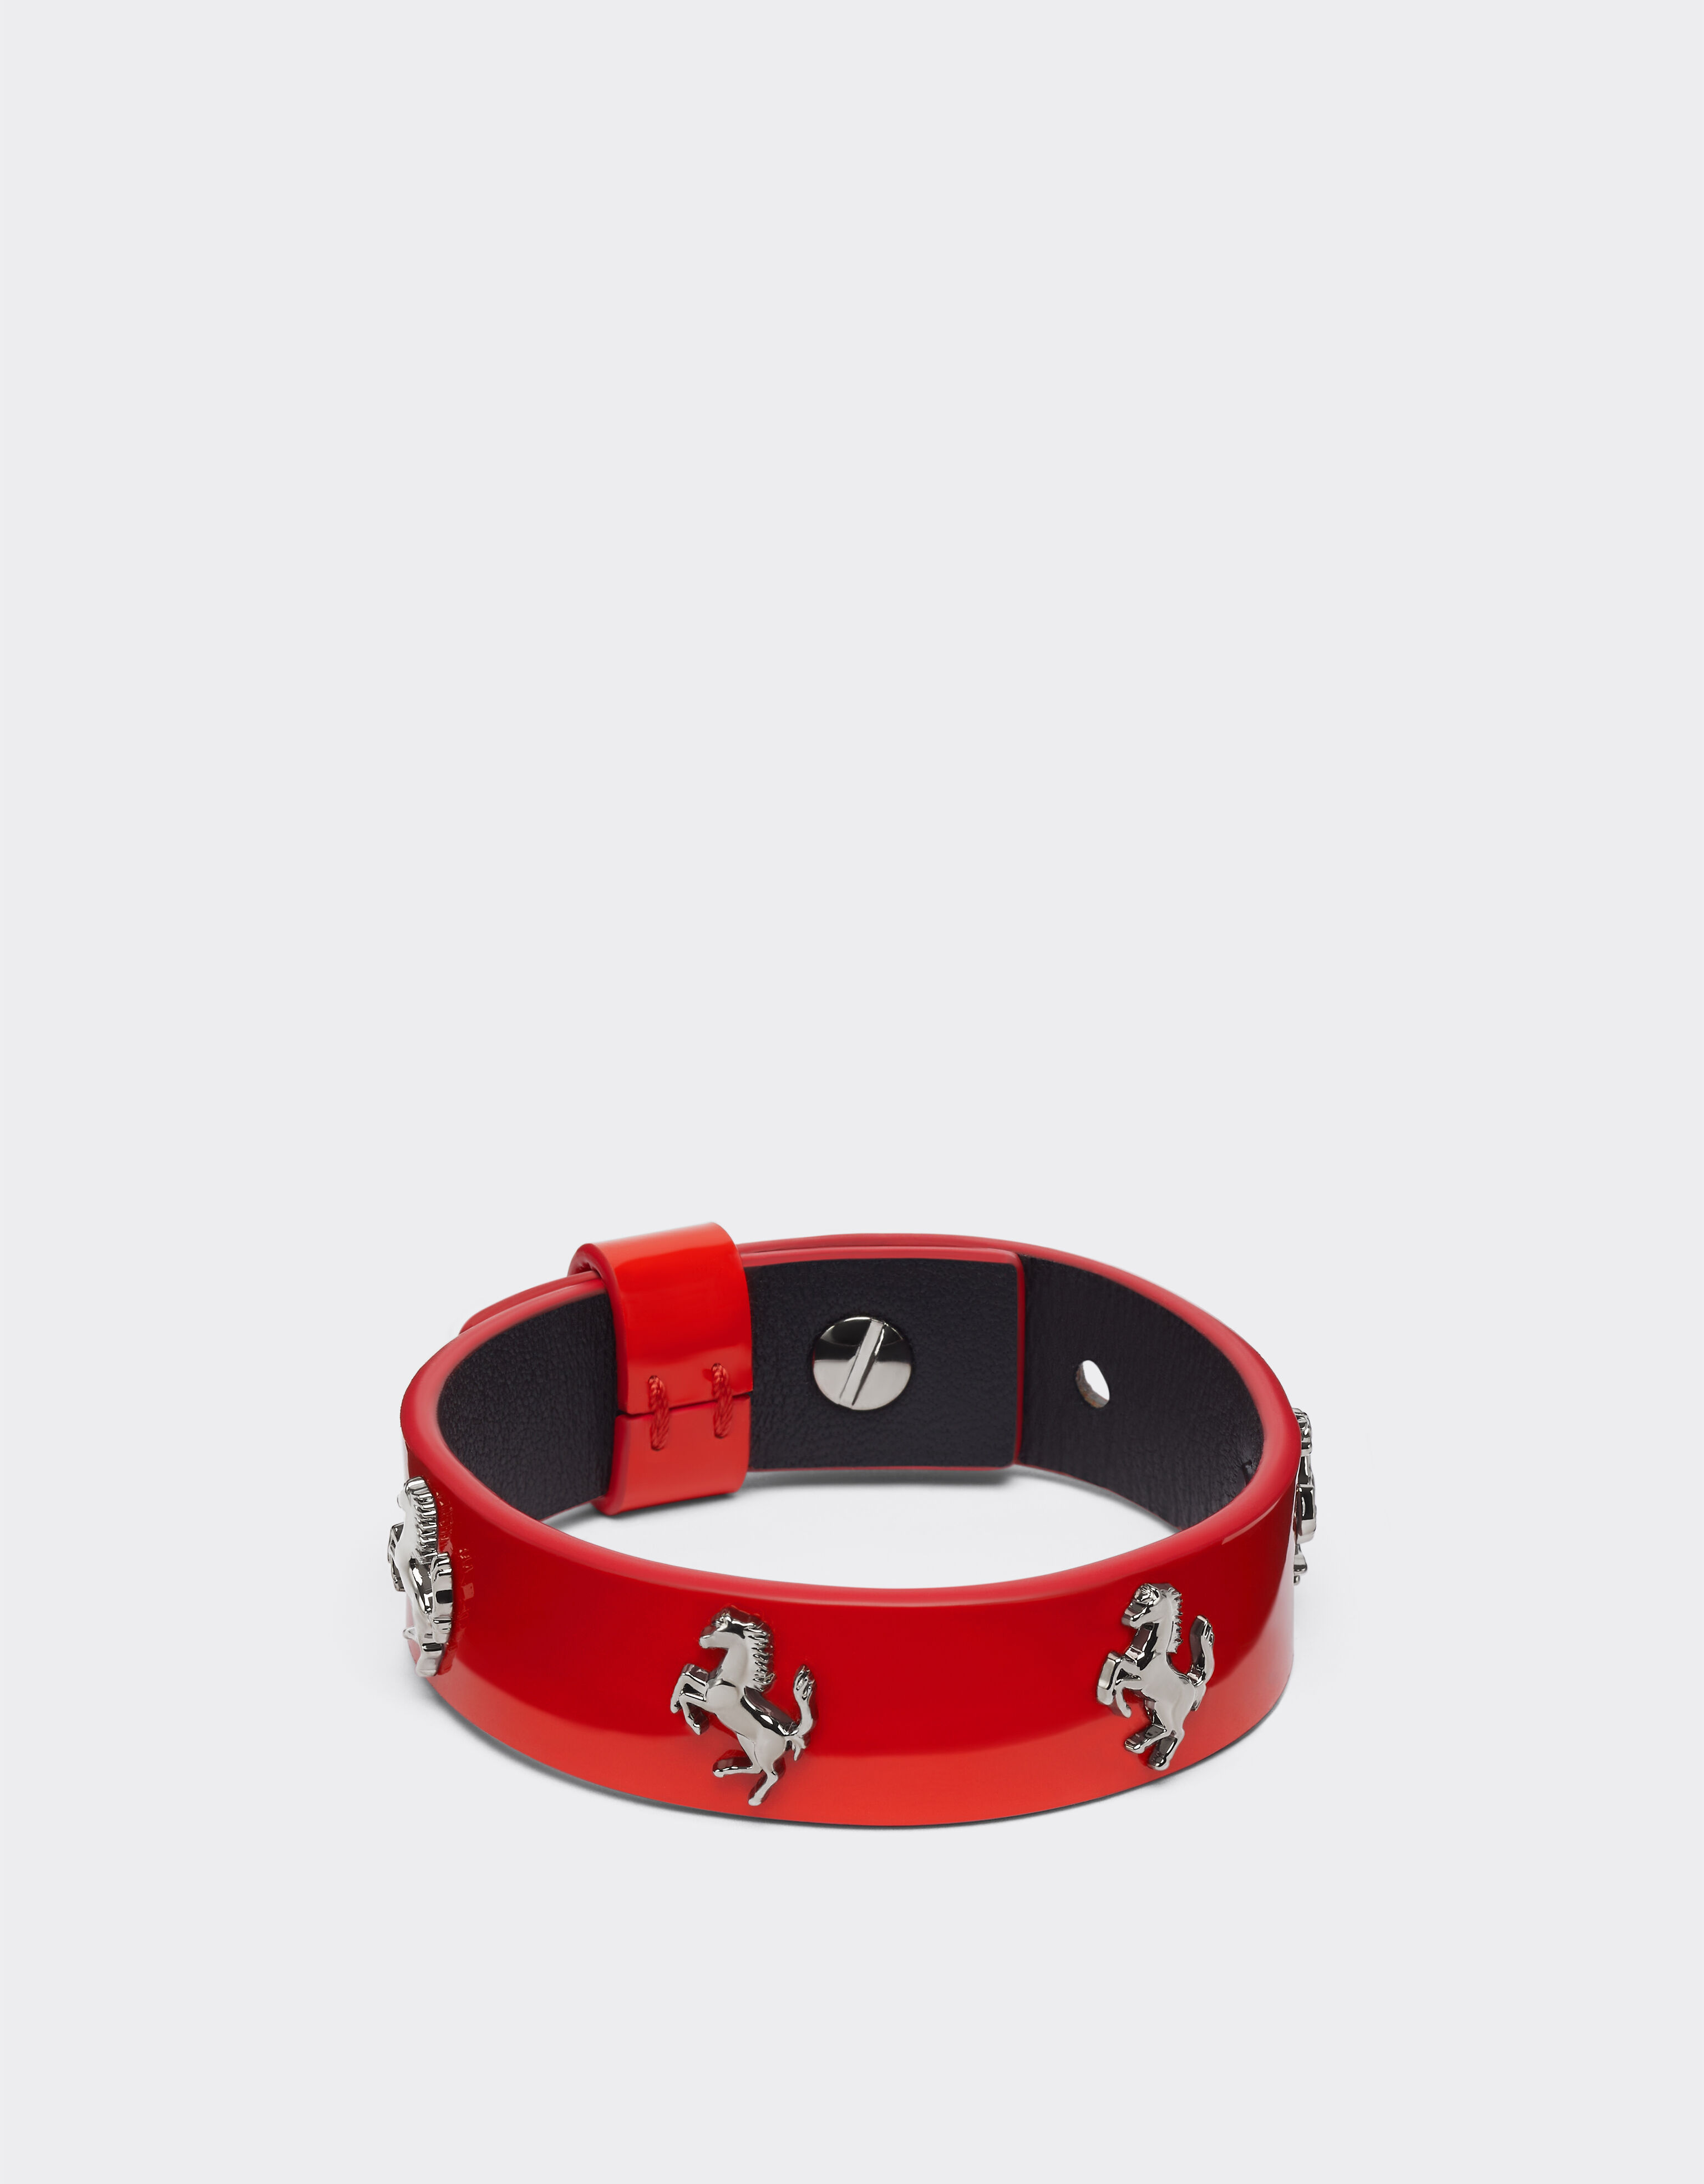 Ferrari Bracelet in red patent leather with studs Rosso Dino 20132f